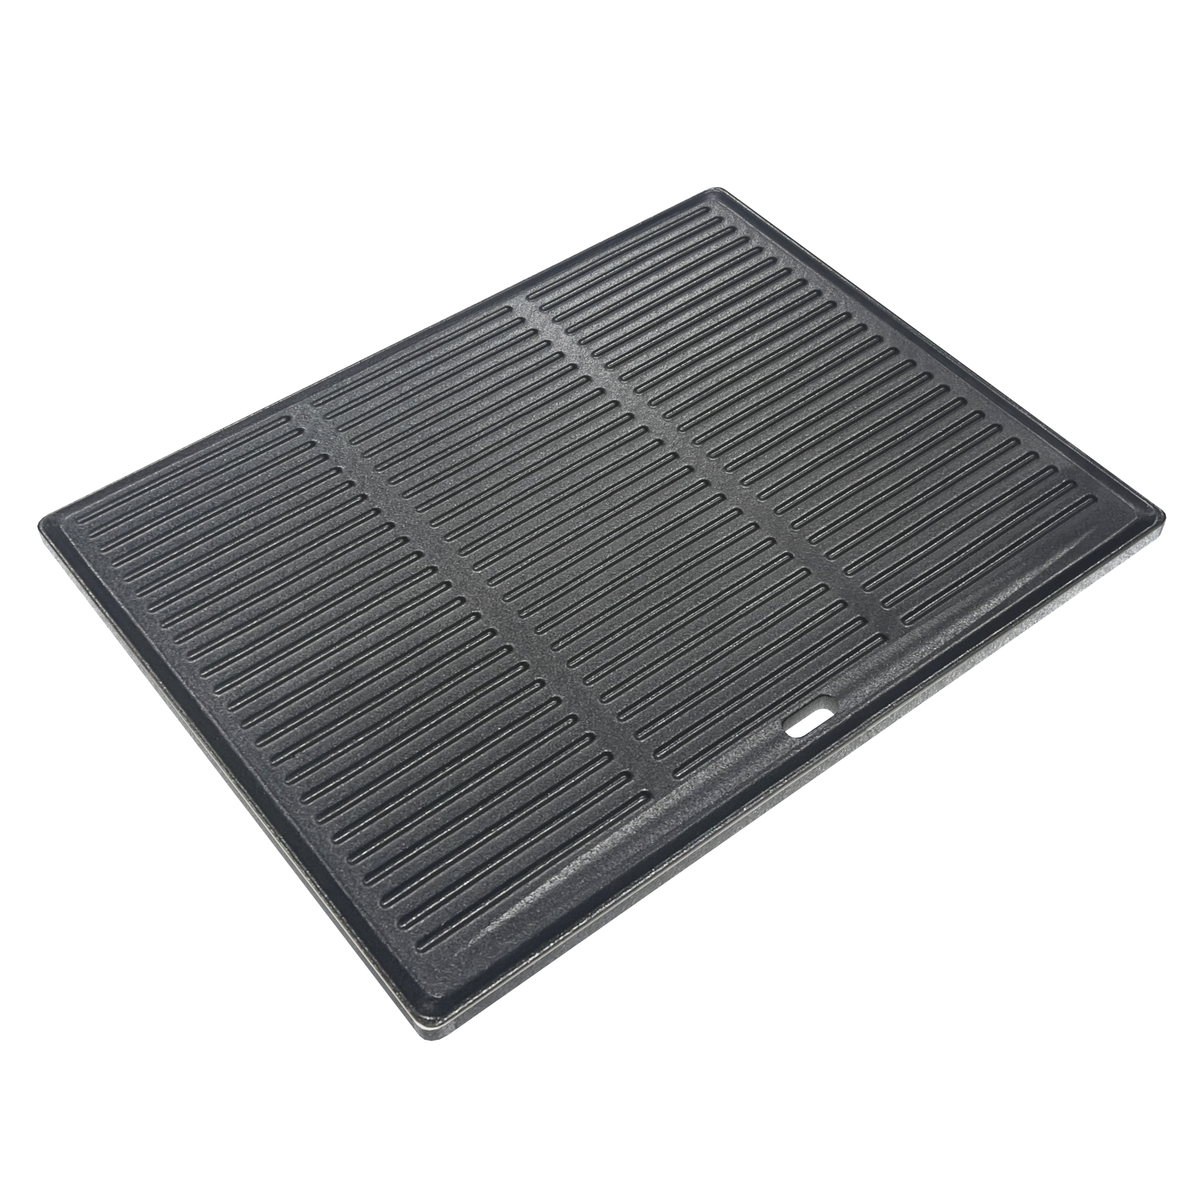 Draco Grills Barbecue Cast Iron Cooking Griddle